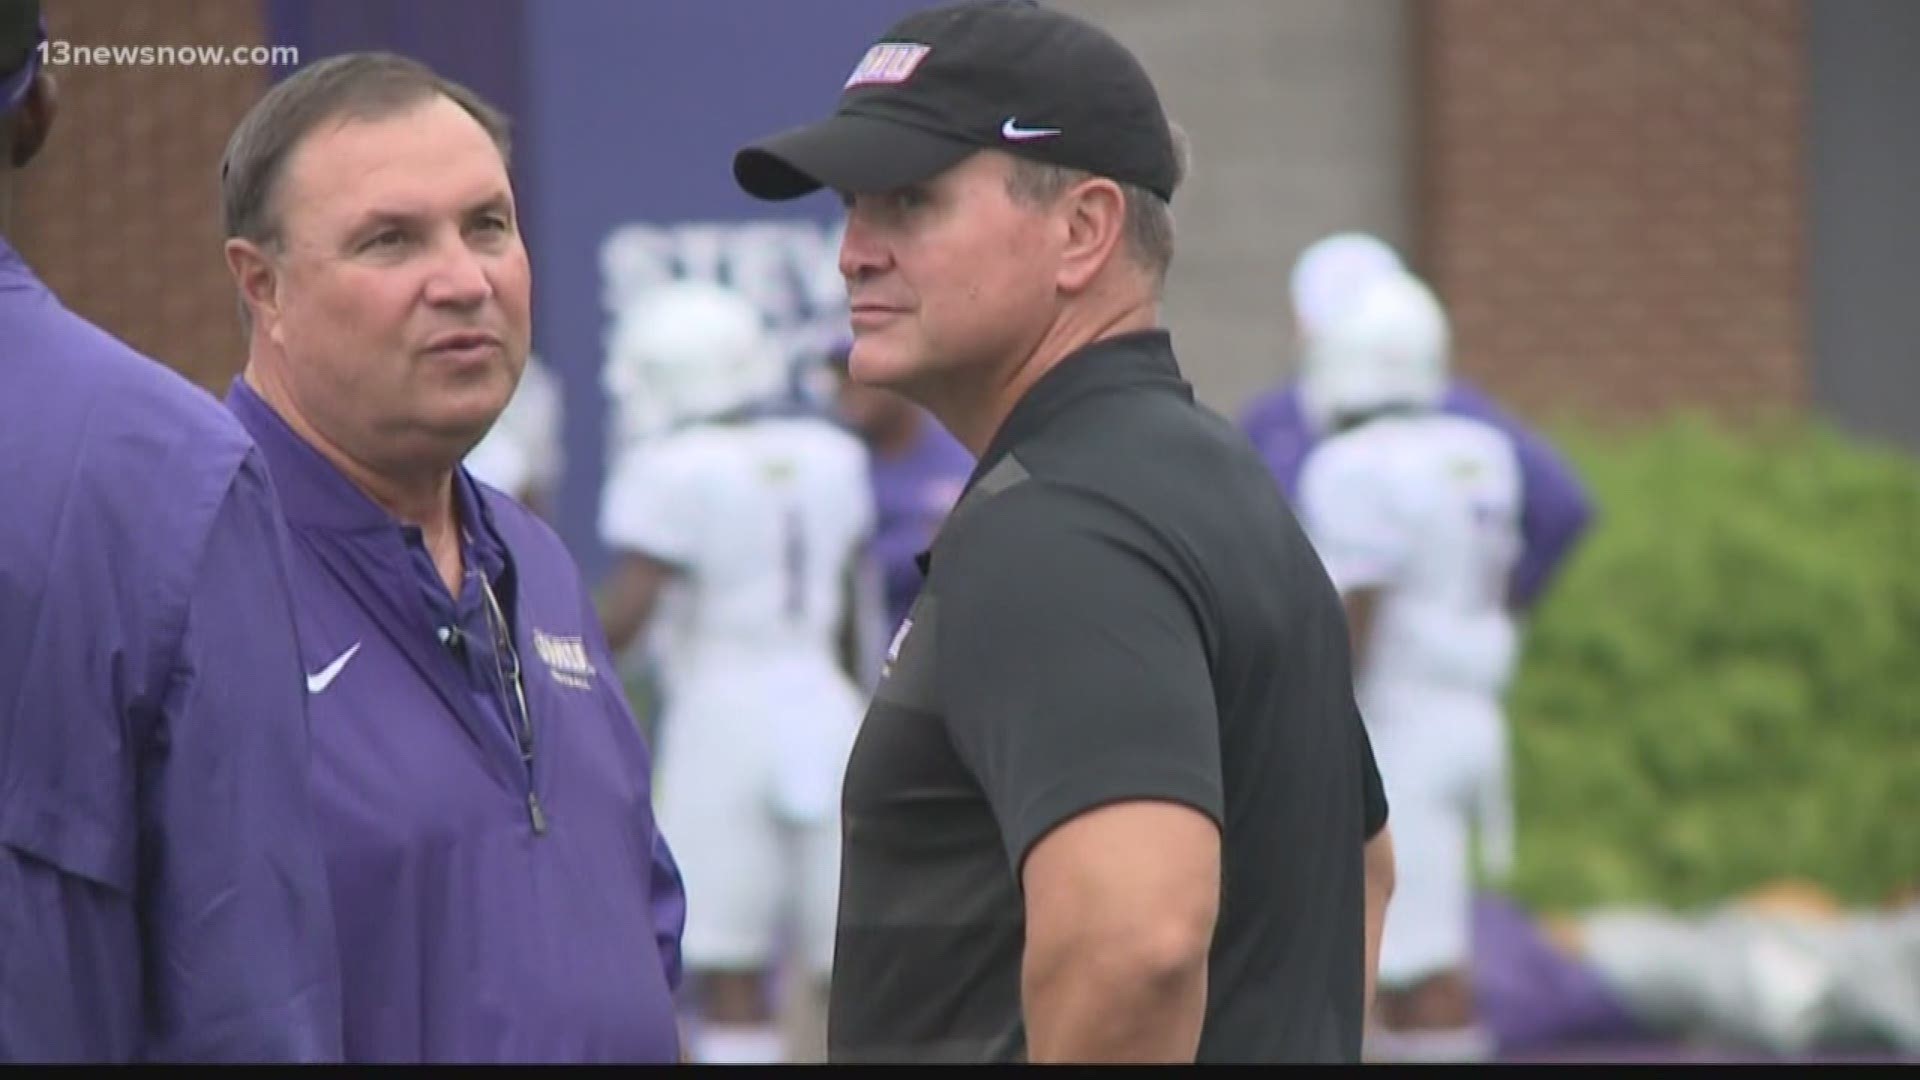 Mike Houston announcing on Sunday he's leaving James Madison for the head football coaching position at East Carolina. He took the Dukes to 3 straight FCS playoff appearances and won a national title in 2016.